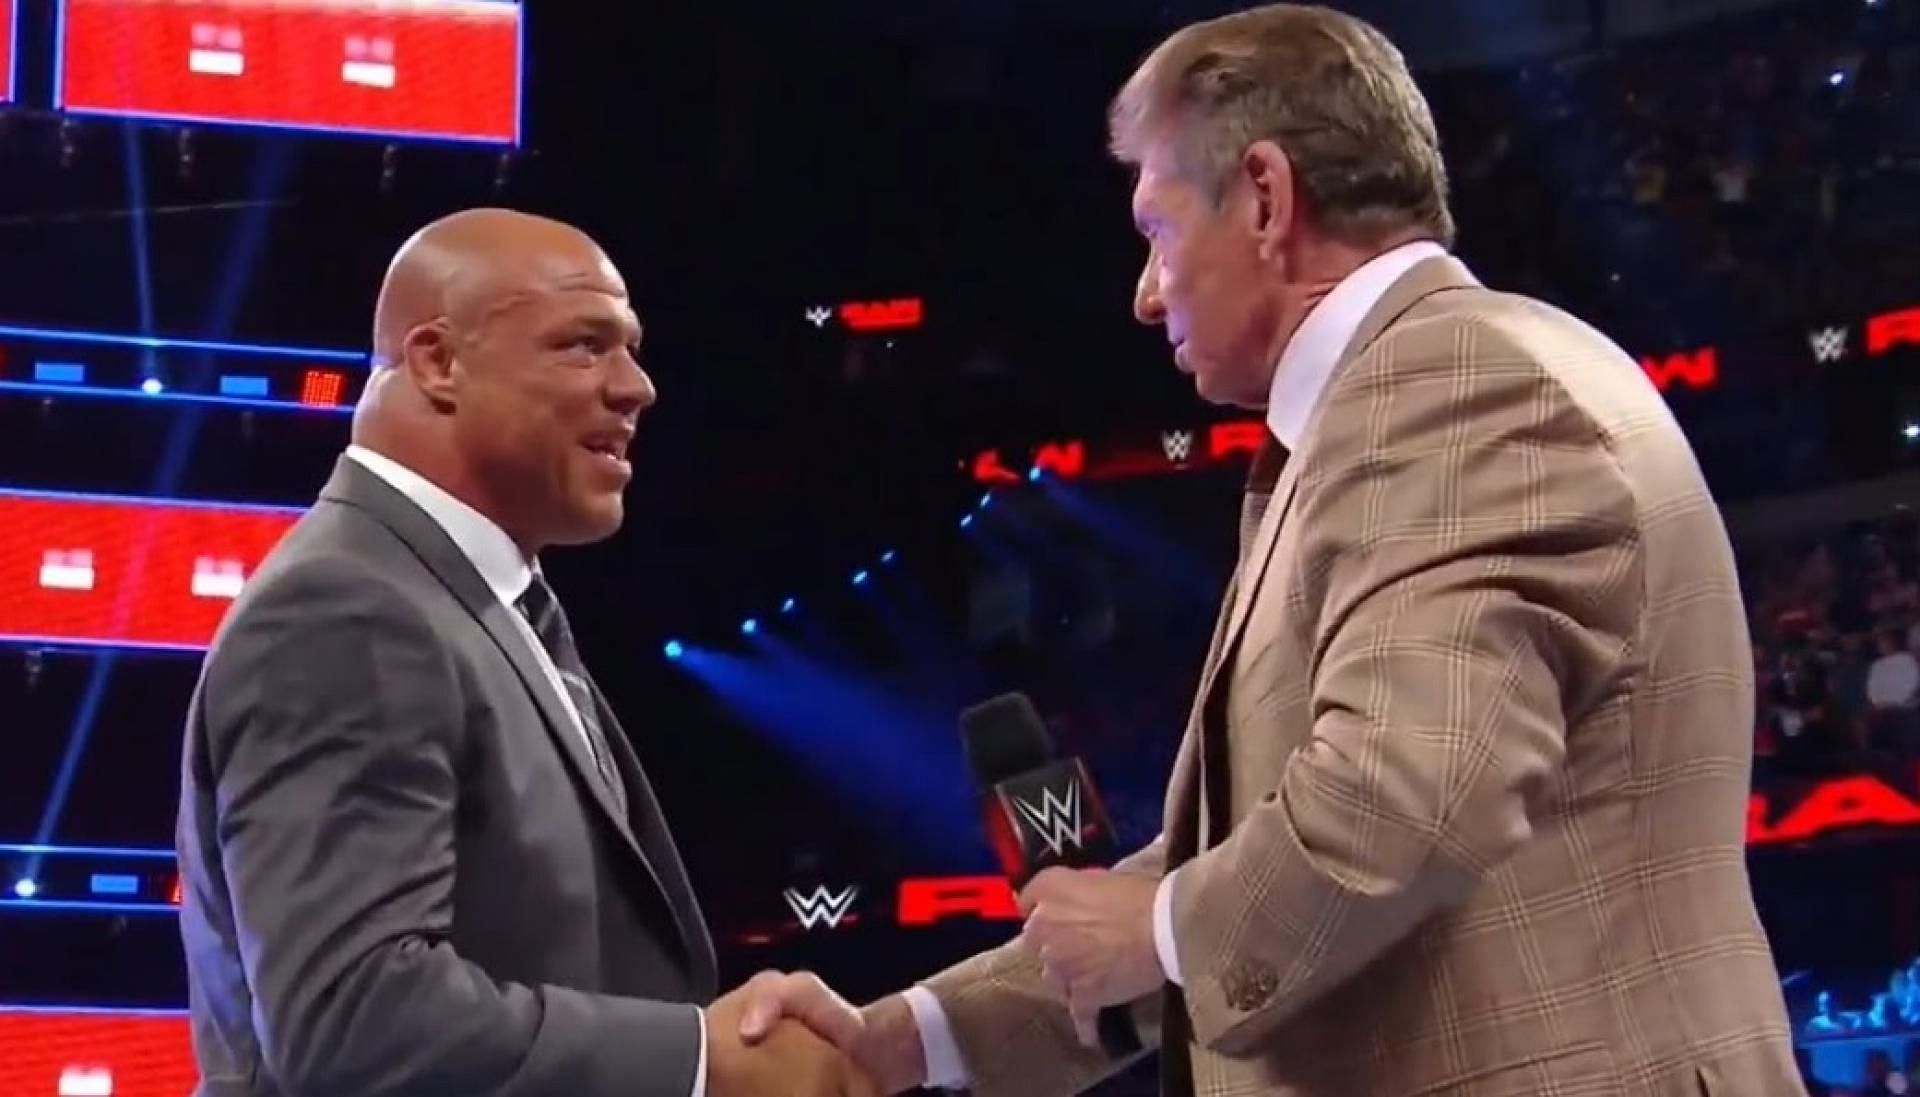 Kurt Angle wasn&#039;t too happy about the pay for the role WWE offered him